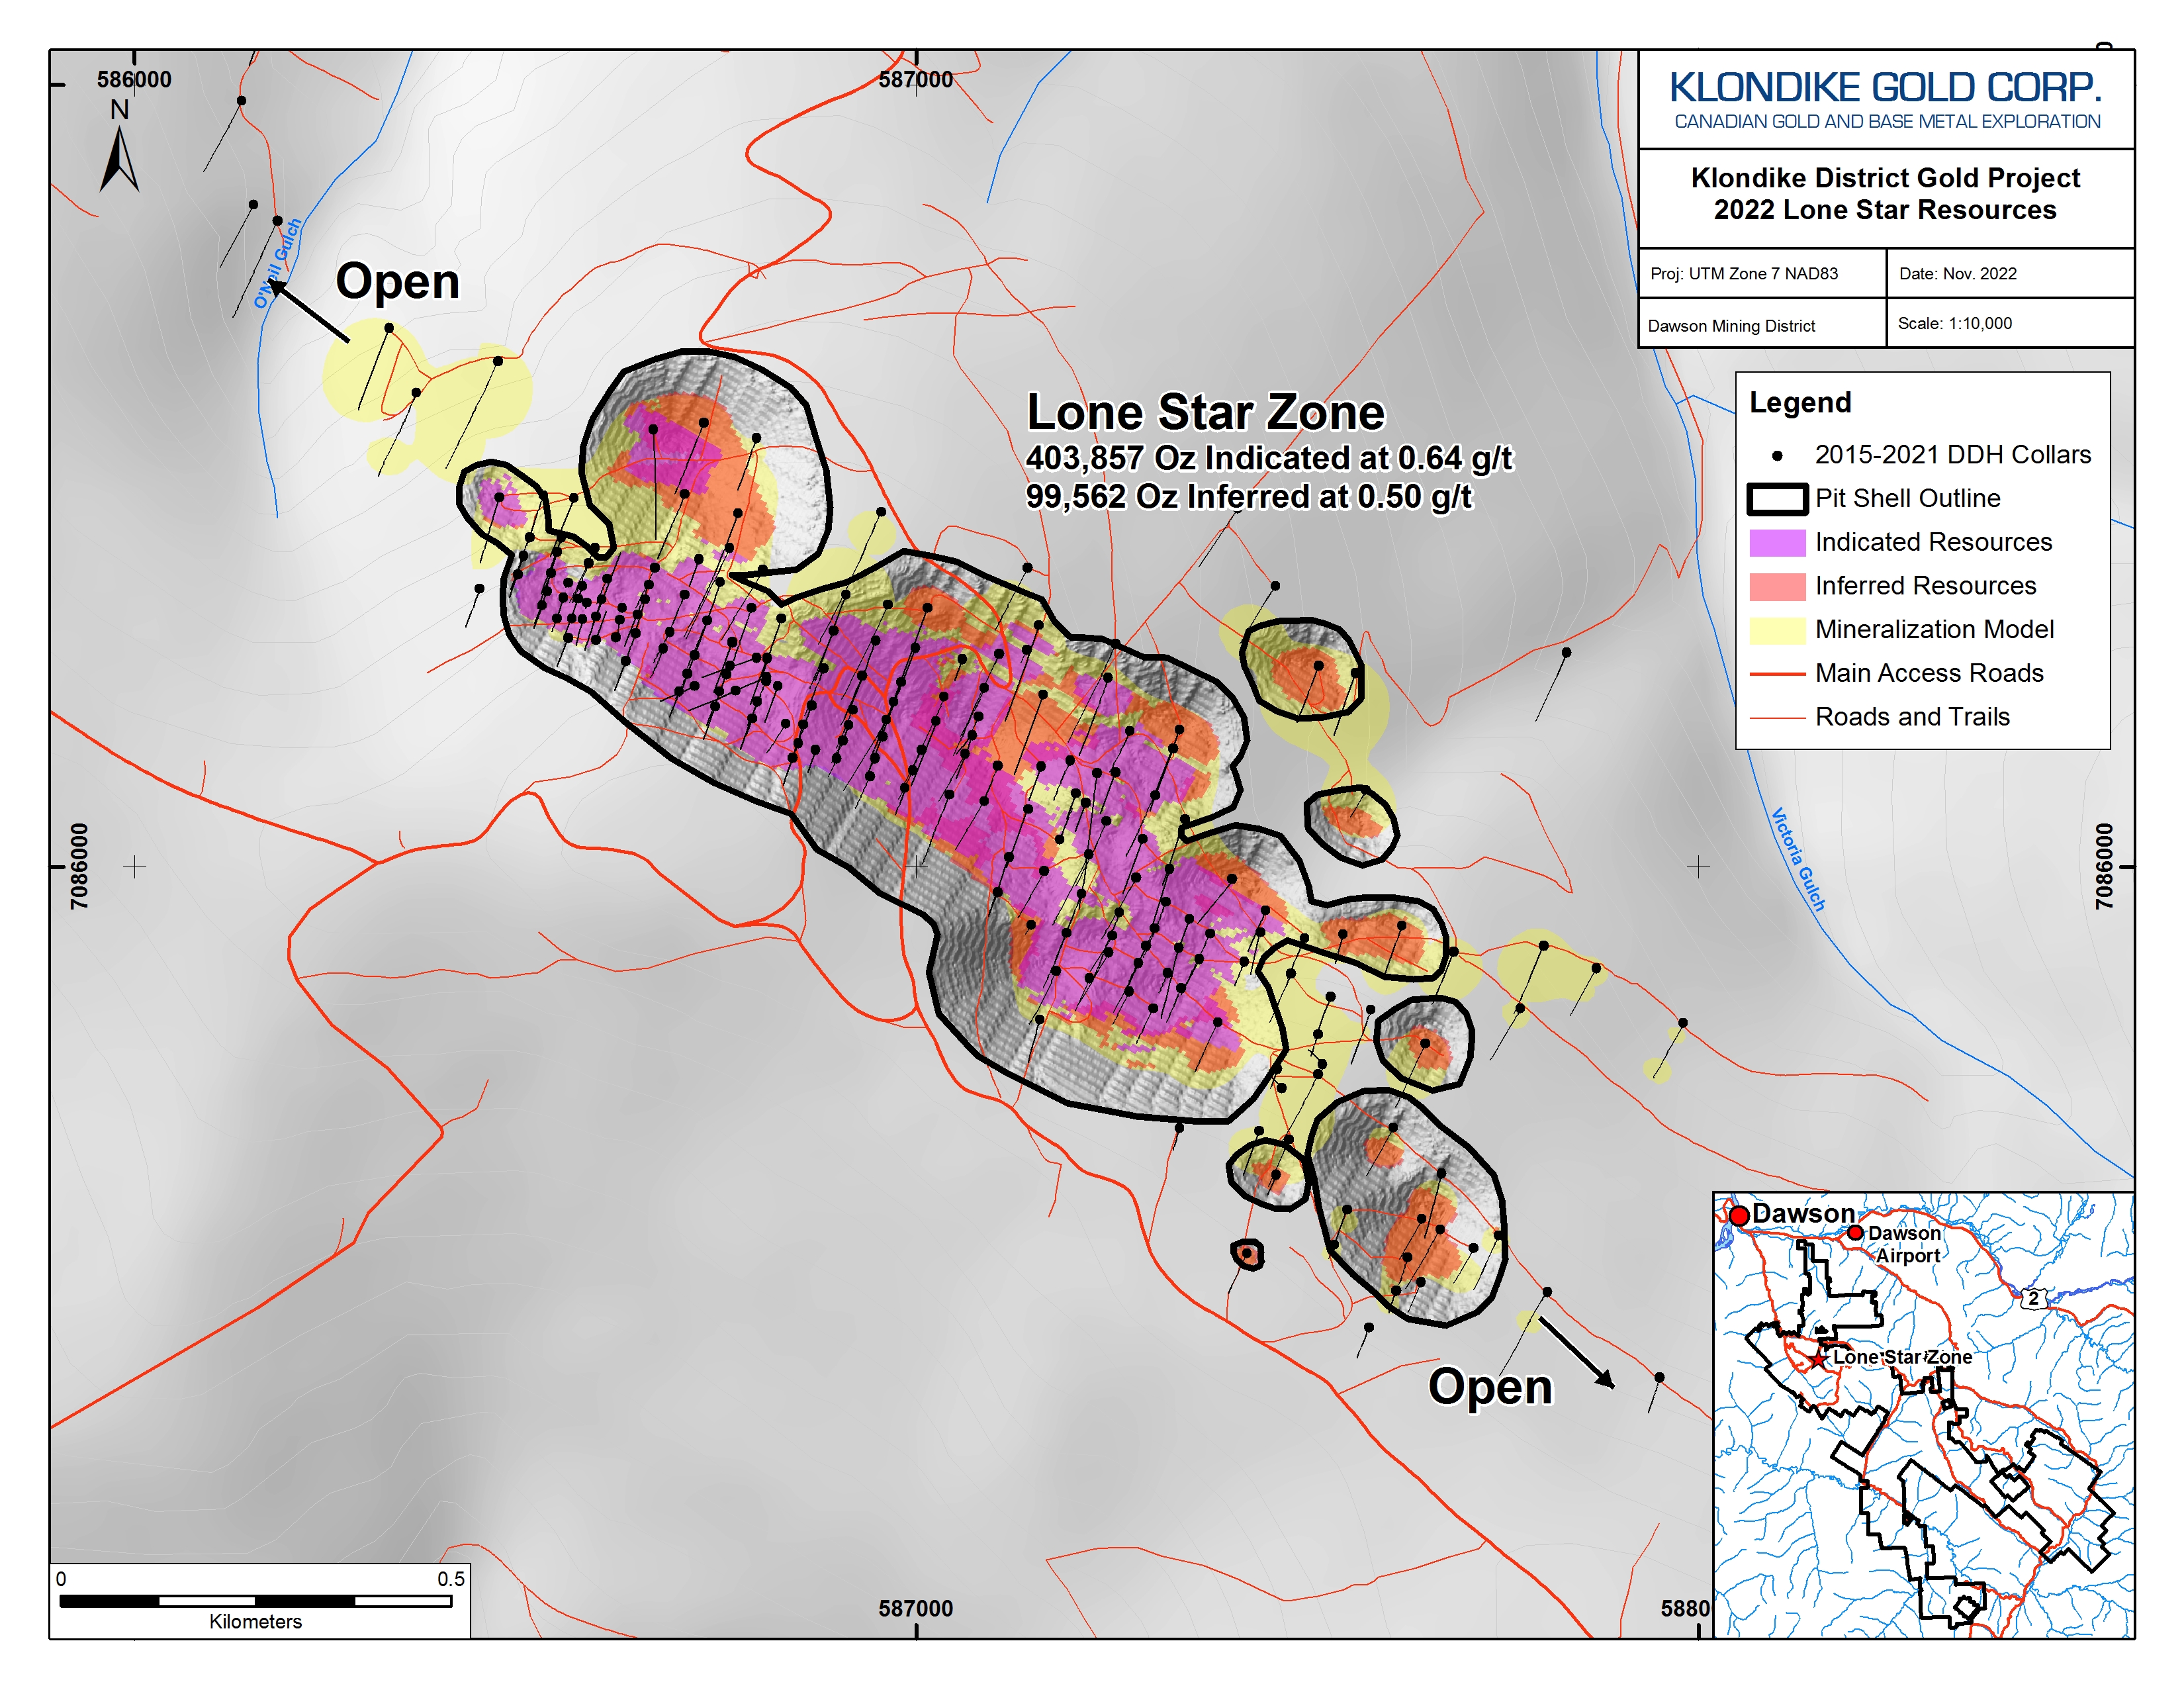 Lone Star Zone Resources